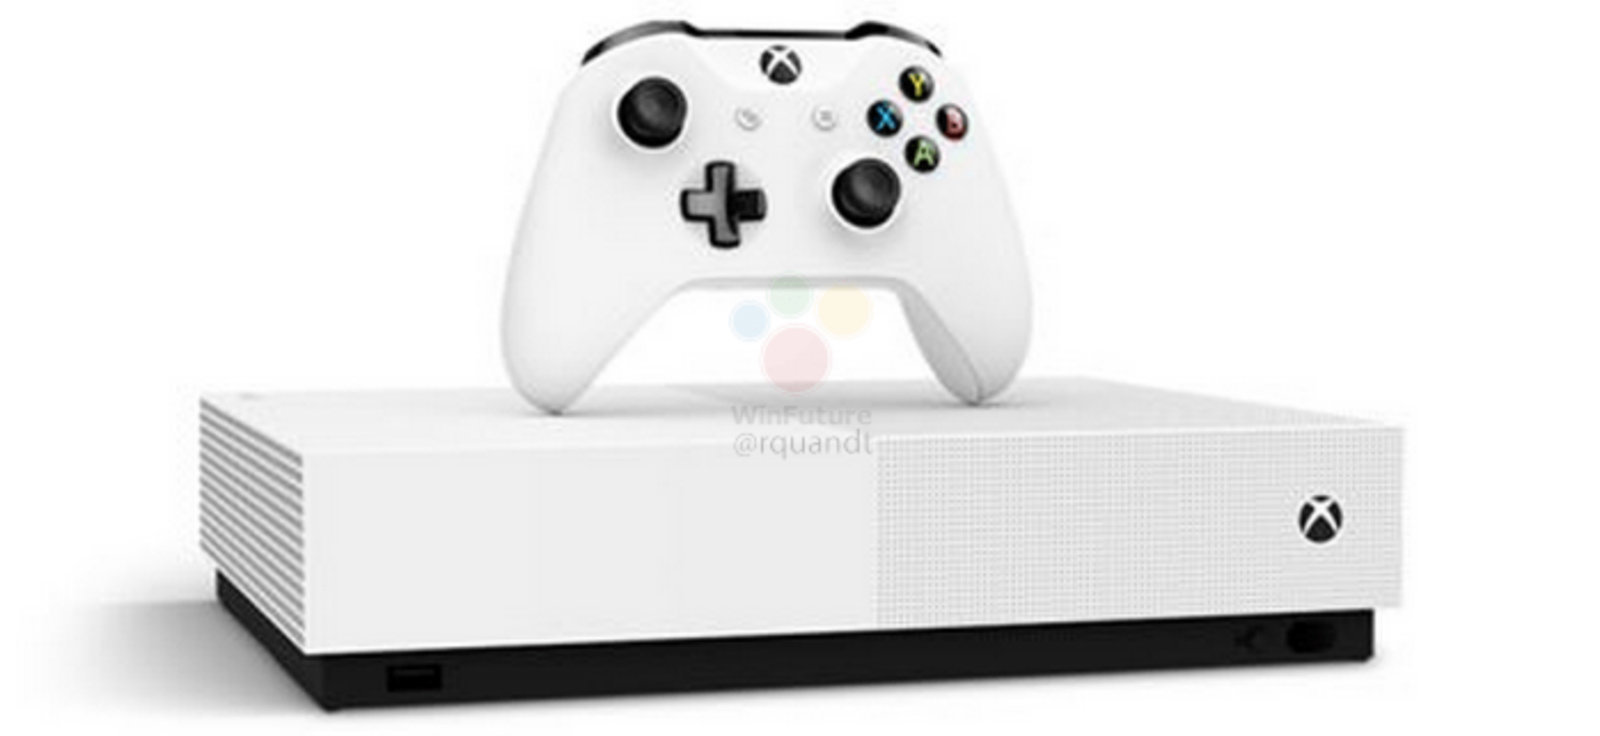 New Leak Shows Microsoft’s Going ‘all Digital’ With Xbox One S